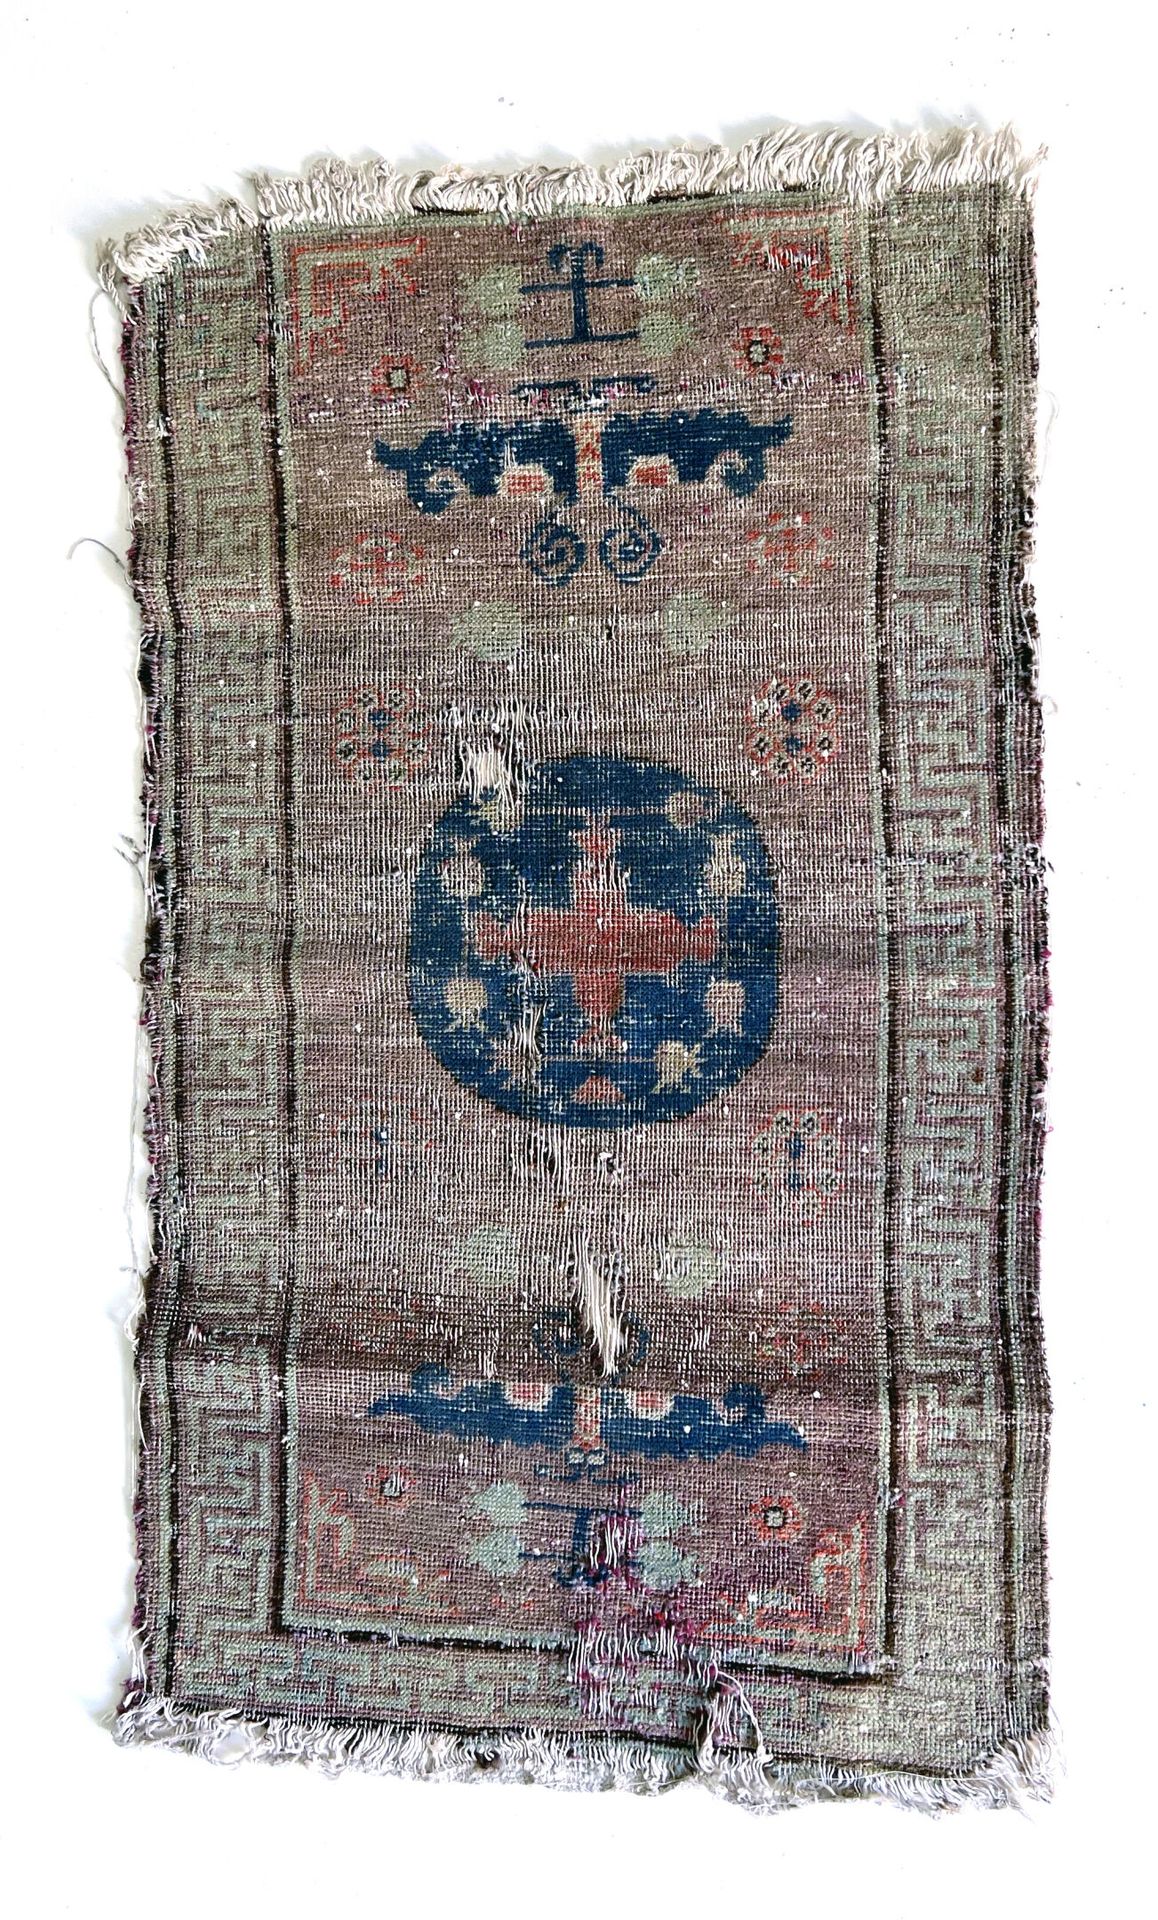 TAPIS D'ORIENT RUGS FROM THE EAST 
Samarcand carpet, 19th century, blue and pink&hellip;